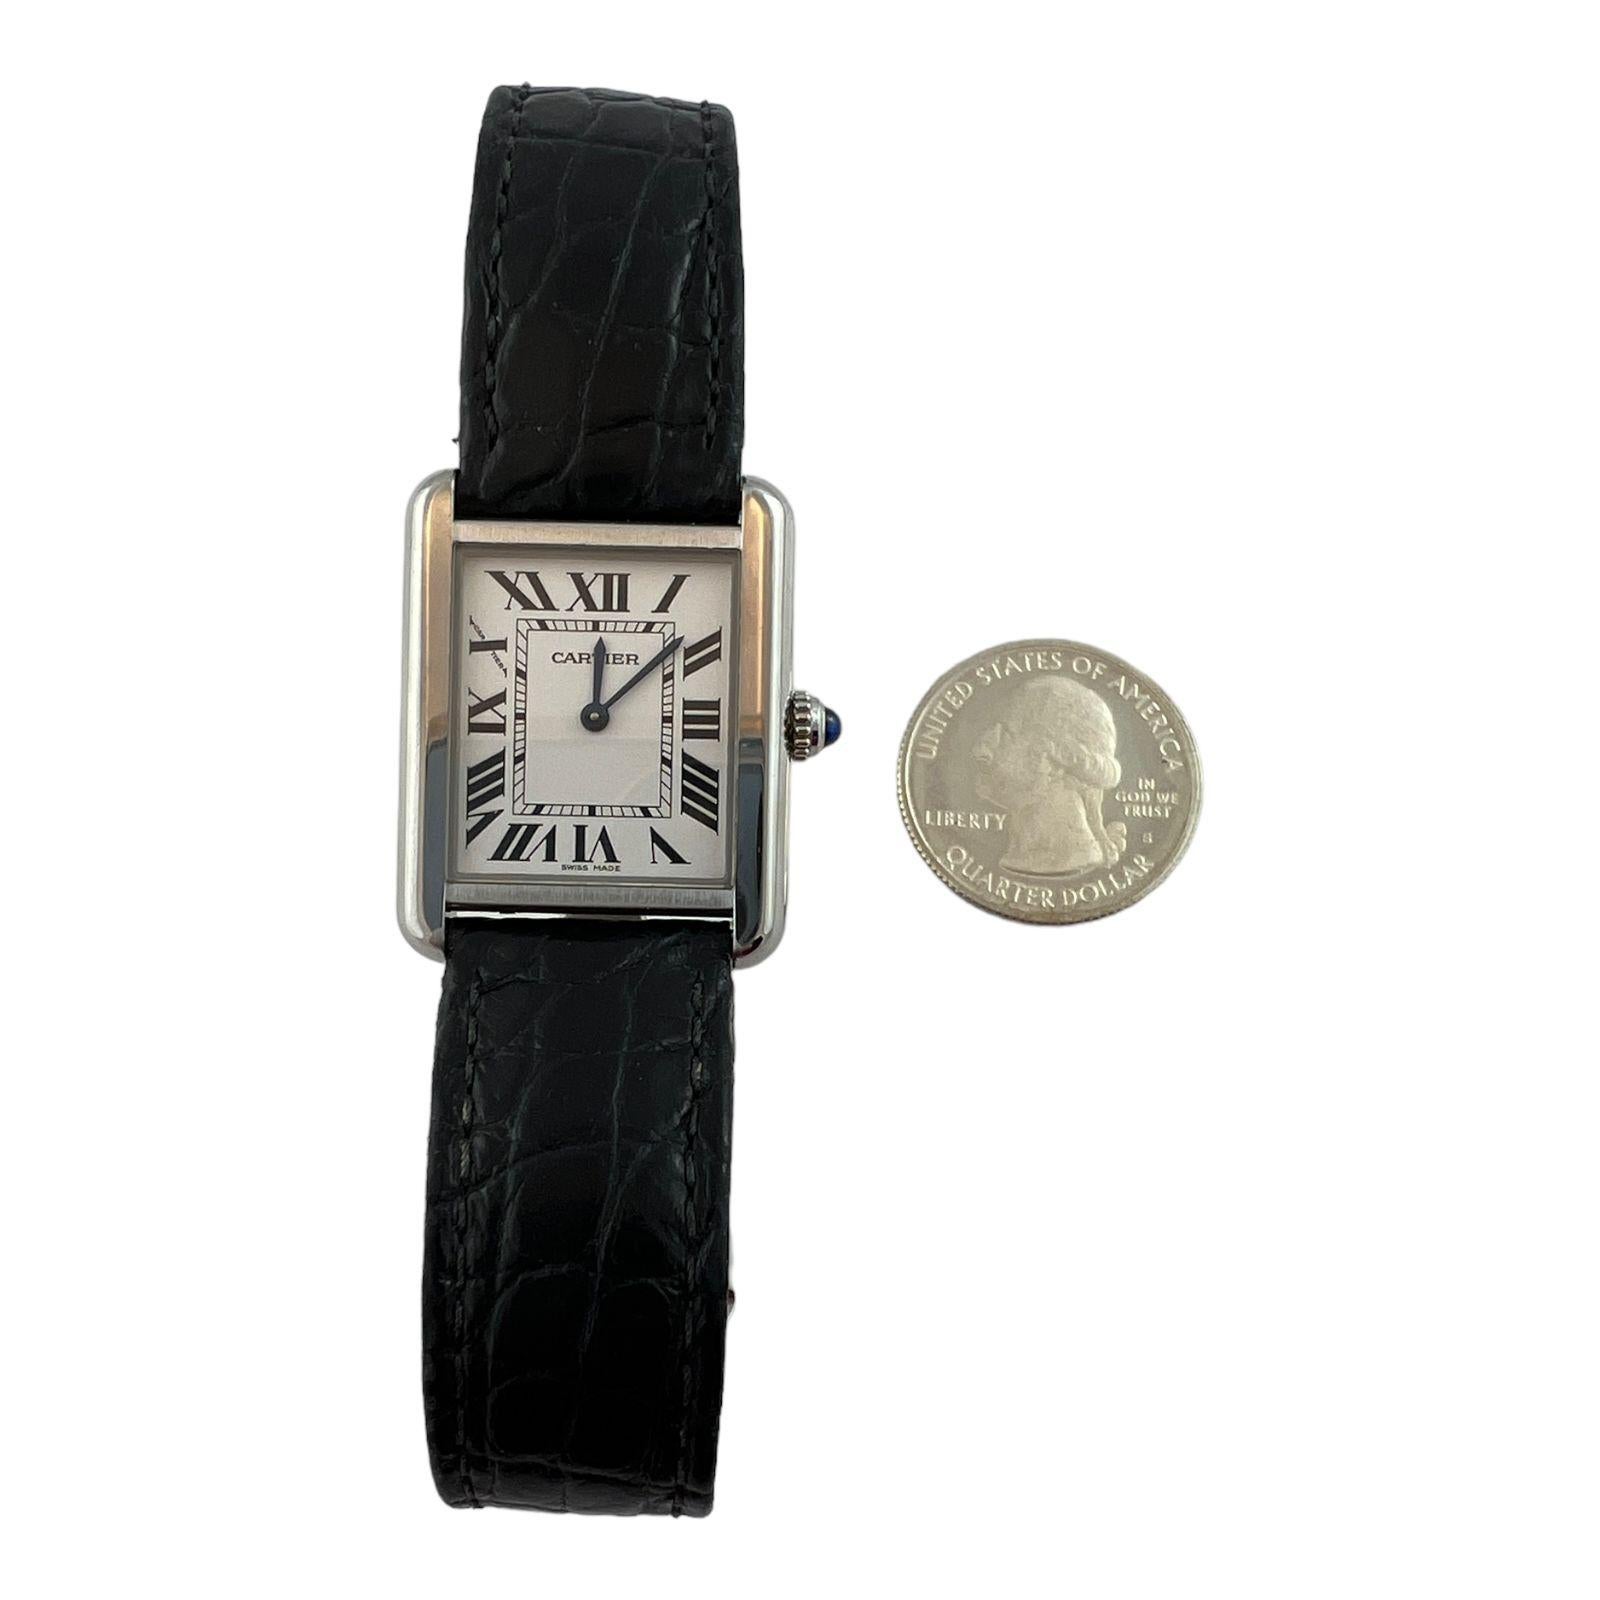 Cartier Tank Solo Ladies Watch 3170 Quartz Stainless Steel Black Leather Band 2